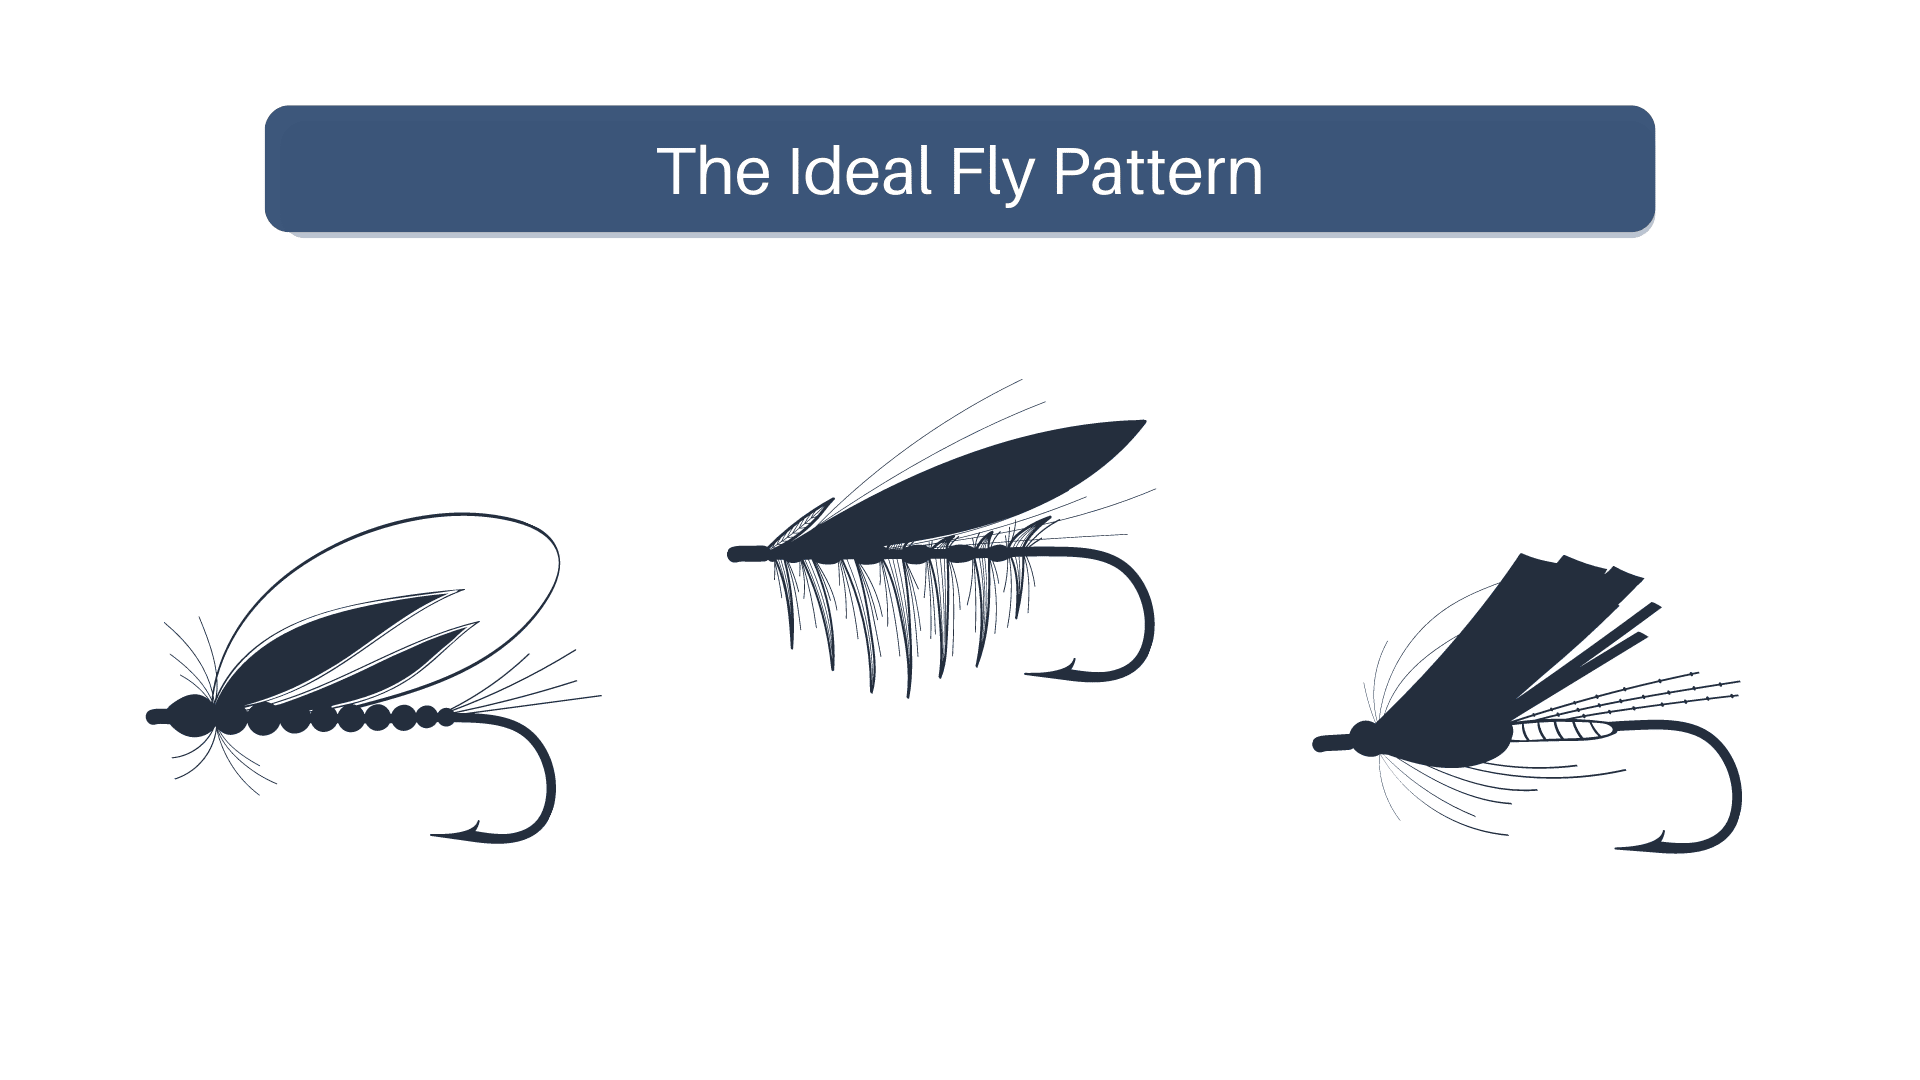 The Ideal Fly Pattern